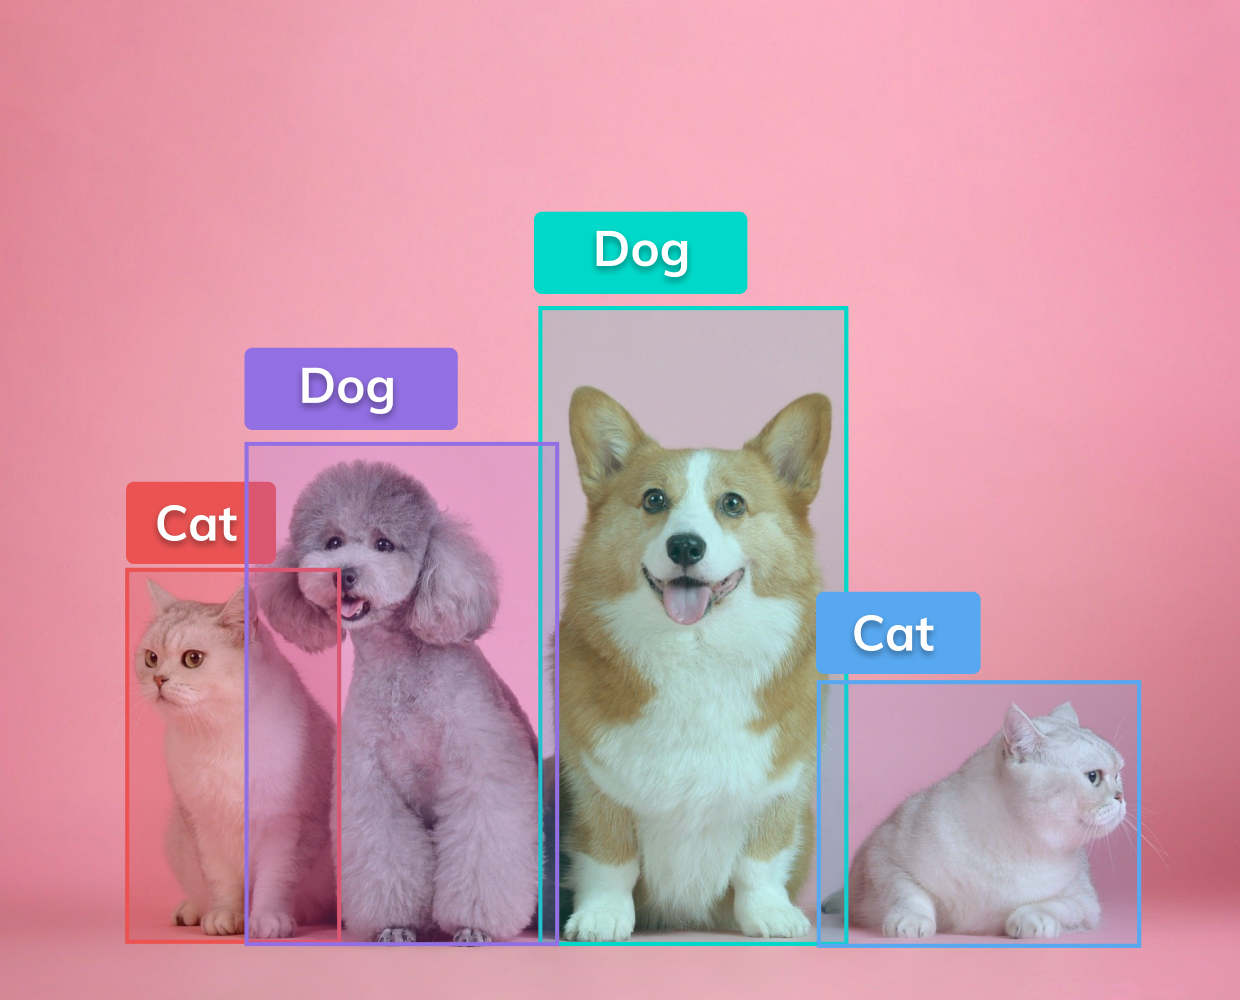 Two cats and two dogs sitting close to each other in transparent boxes of different colors